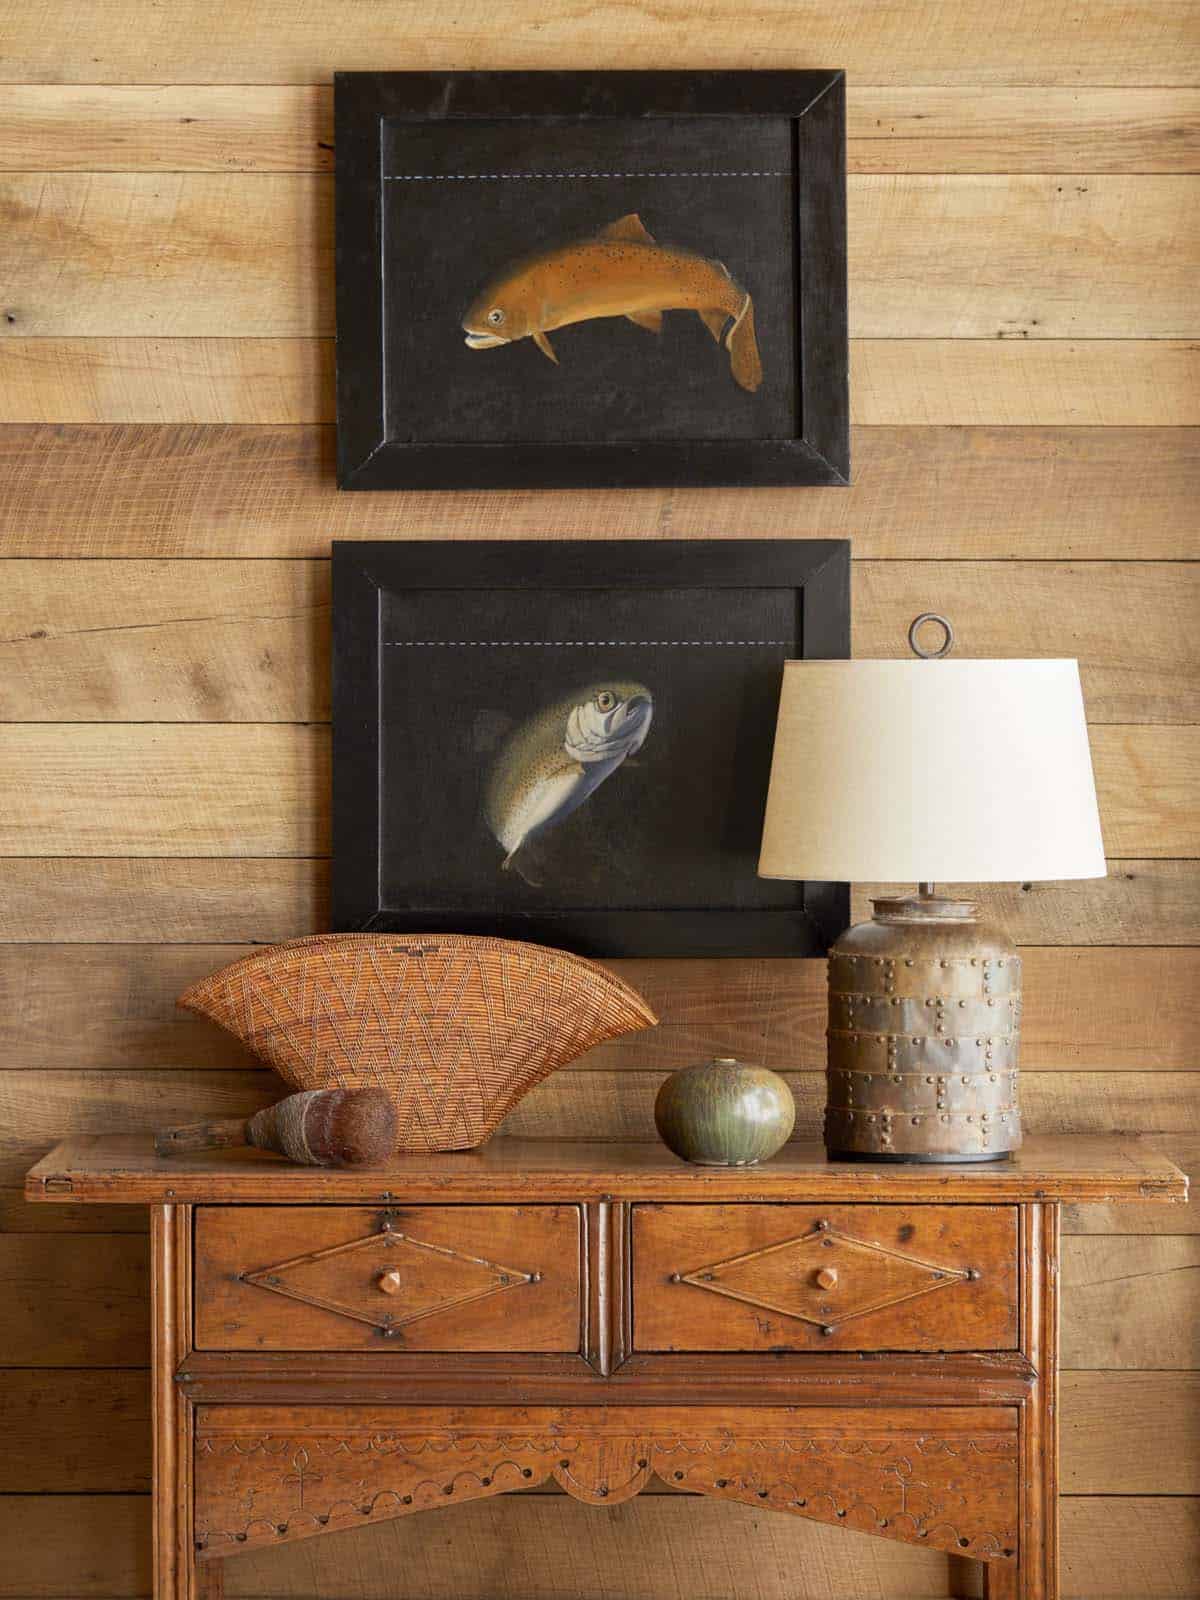 rustic table with accessories and artwork on the wall